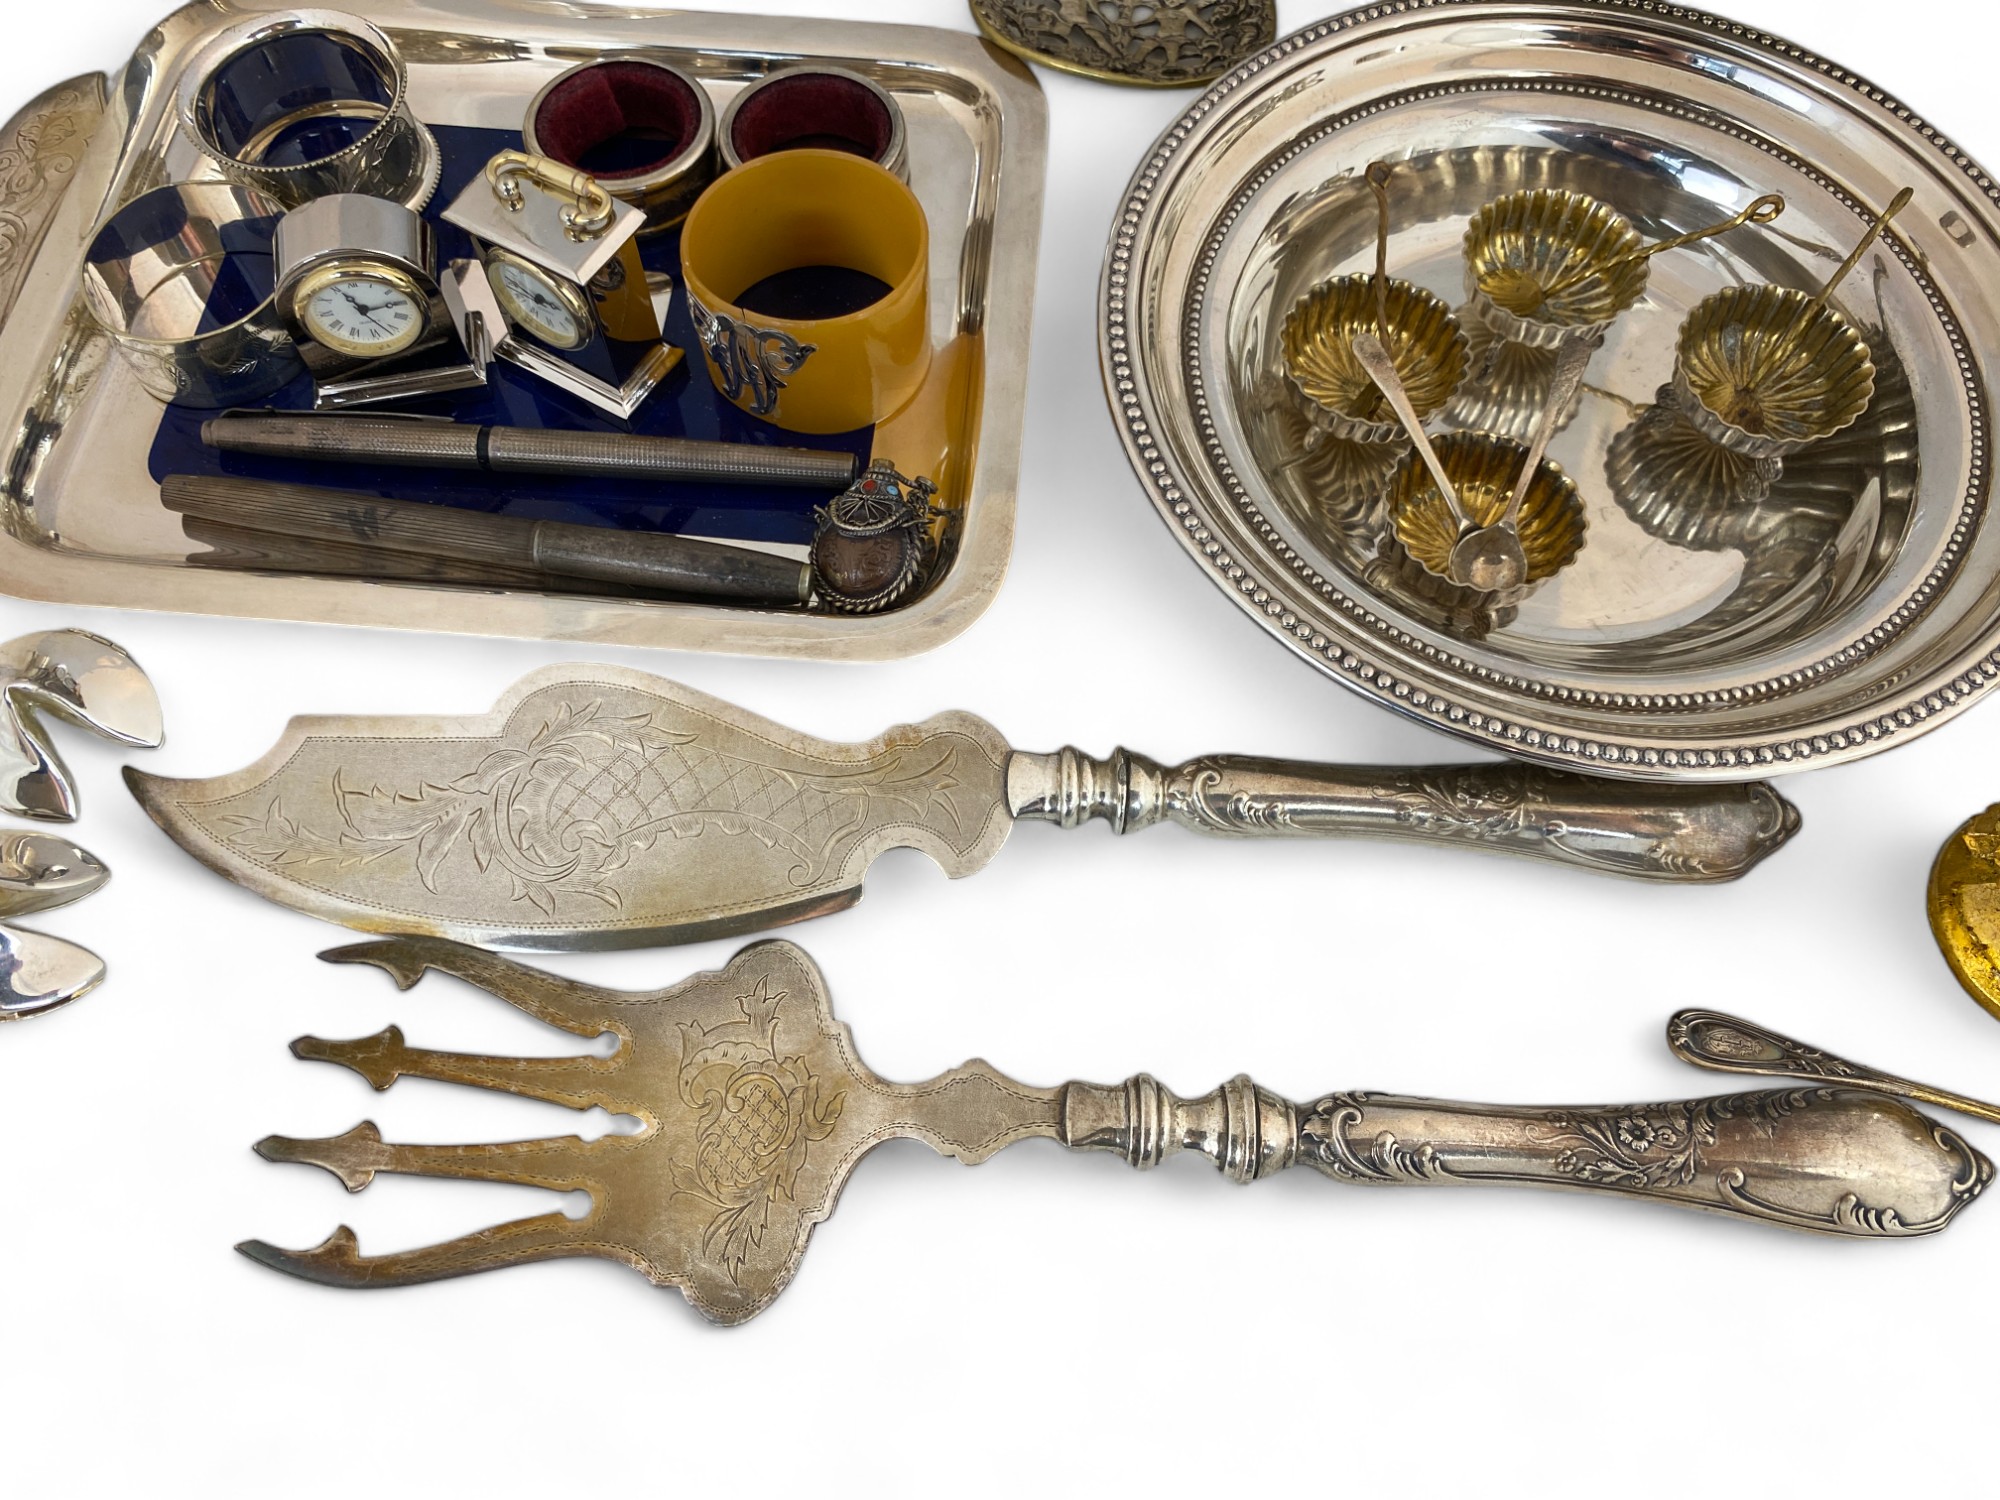 A group lot of silver plate and objects de vertu - Image 2 of 6